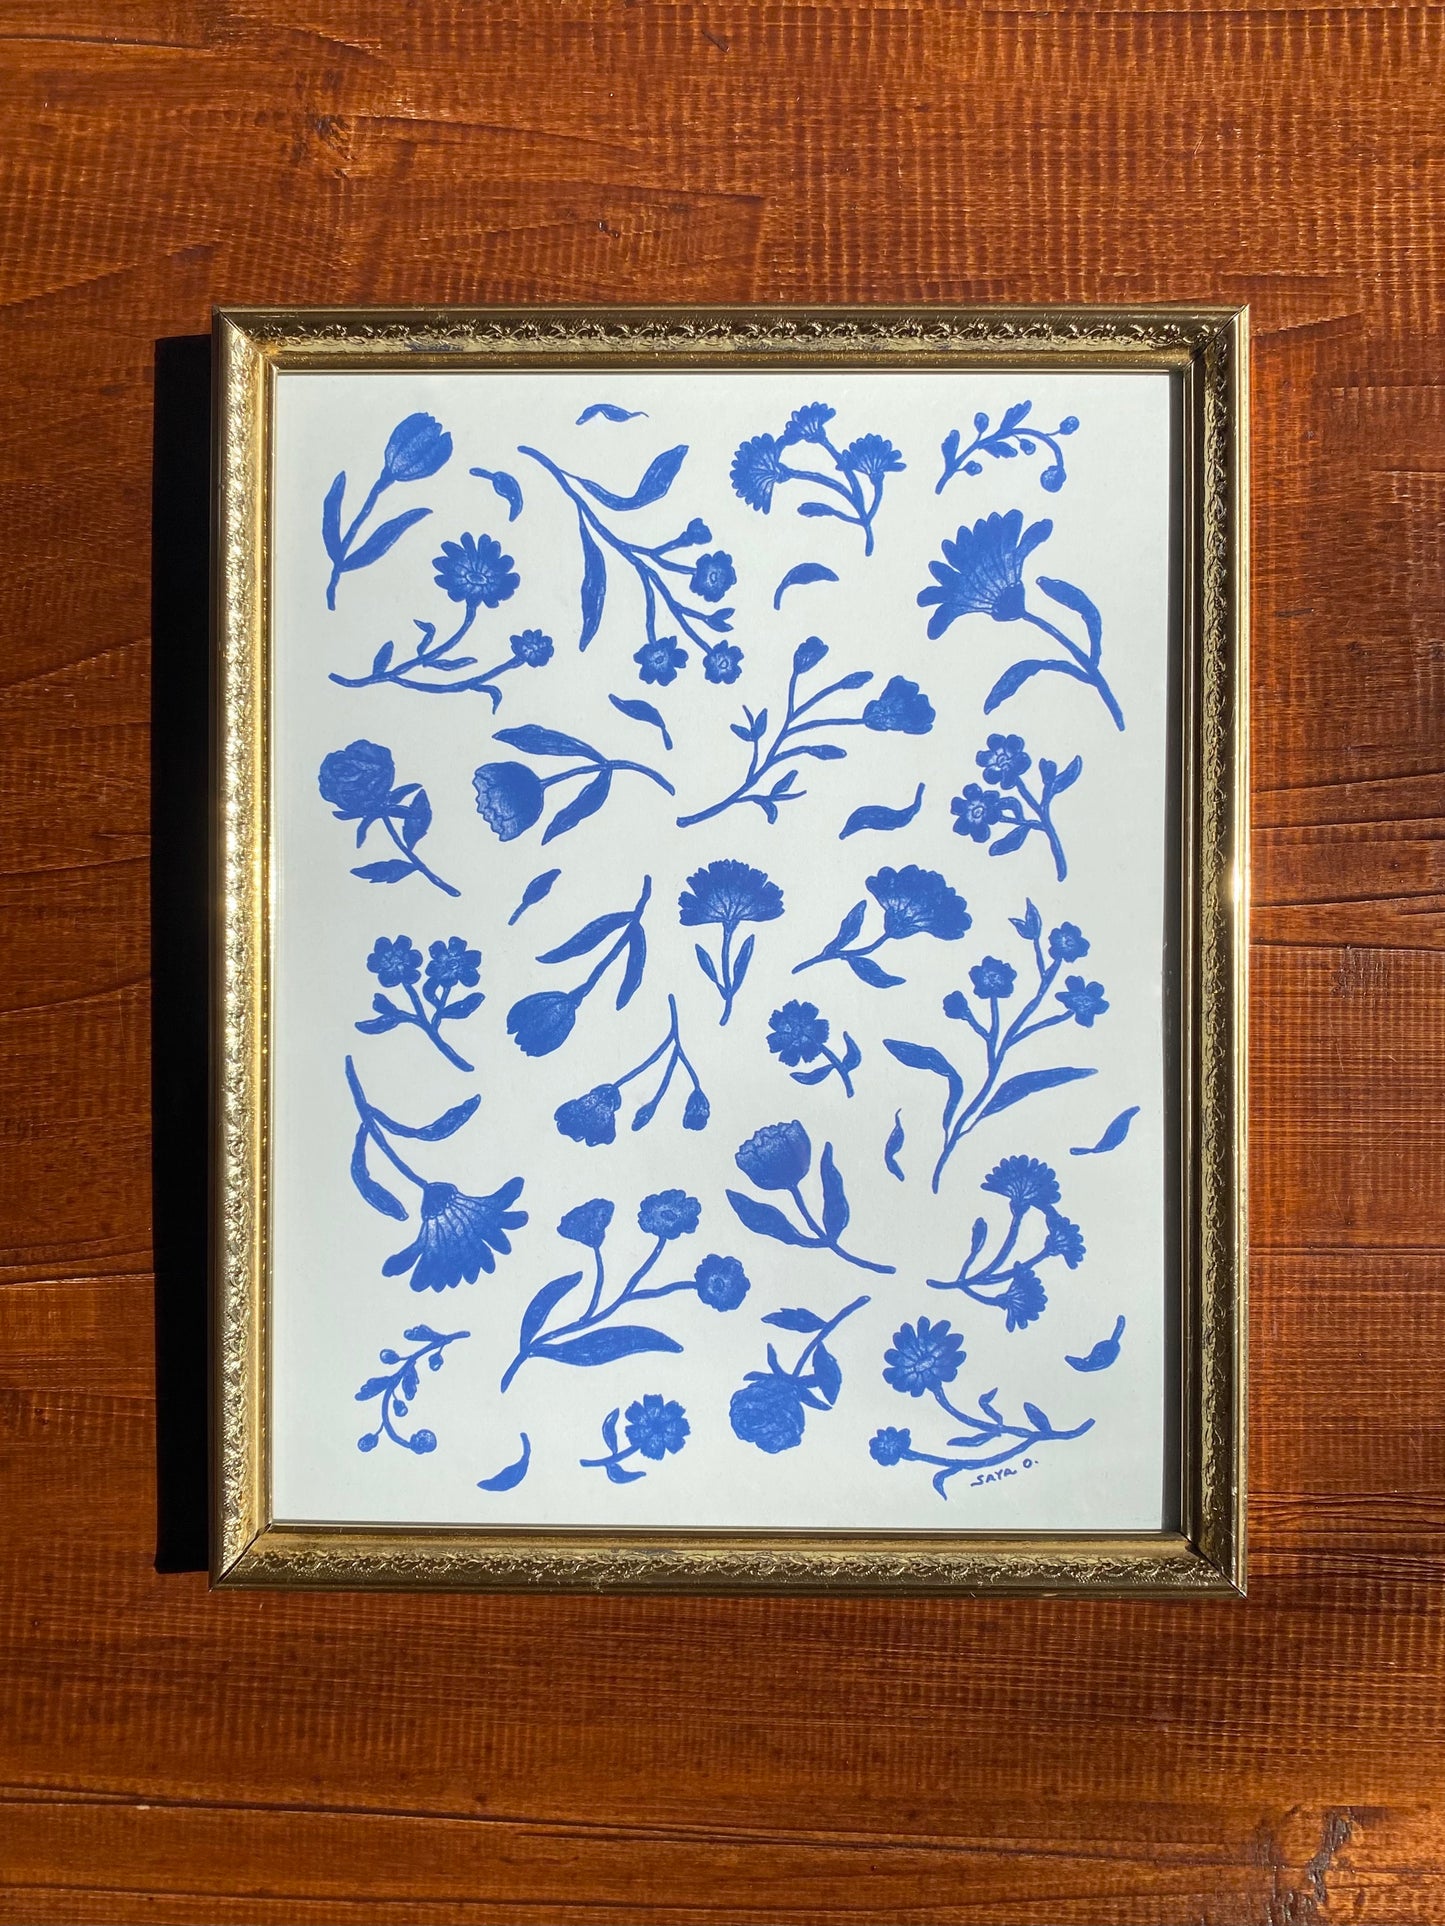 A classic porcelain-style floral print with blue flowers on a natural white background in a gold frame